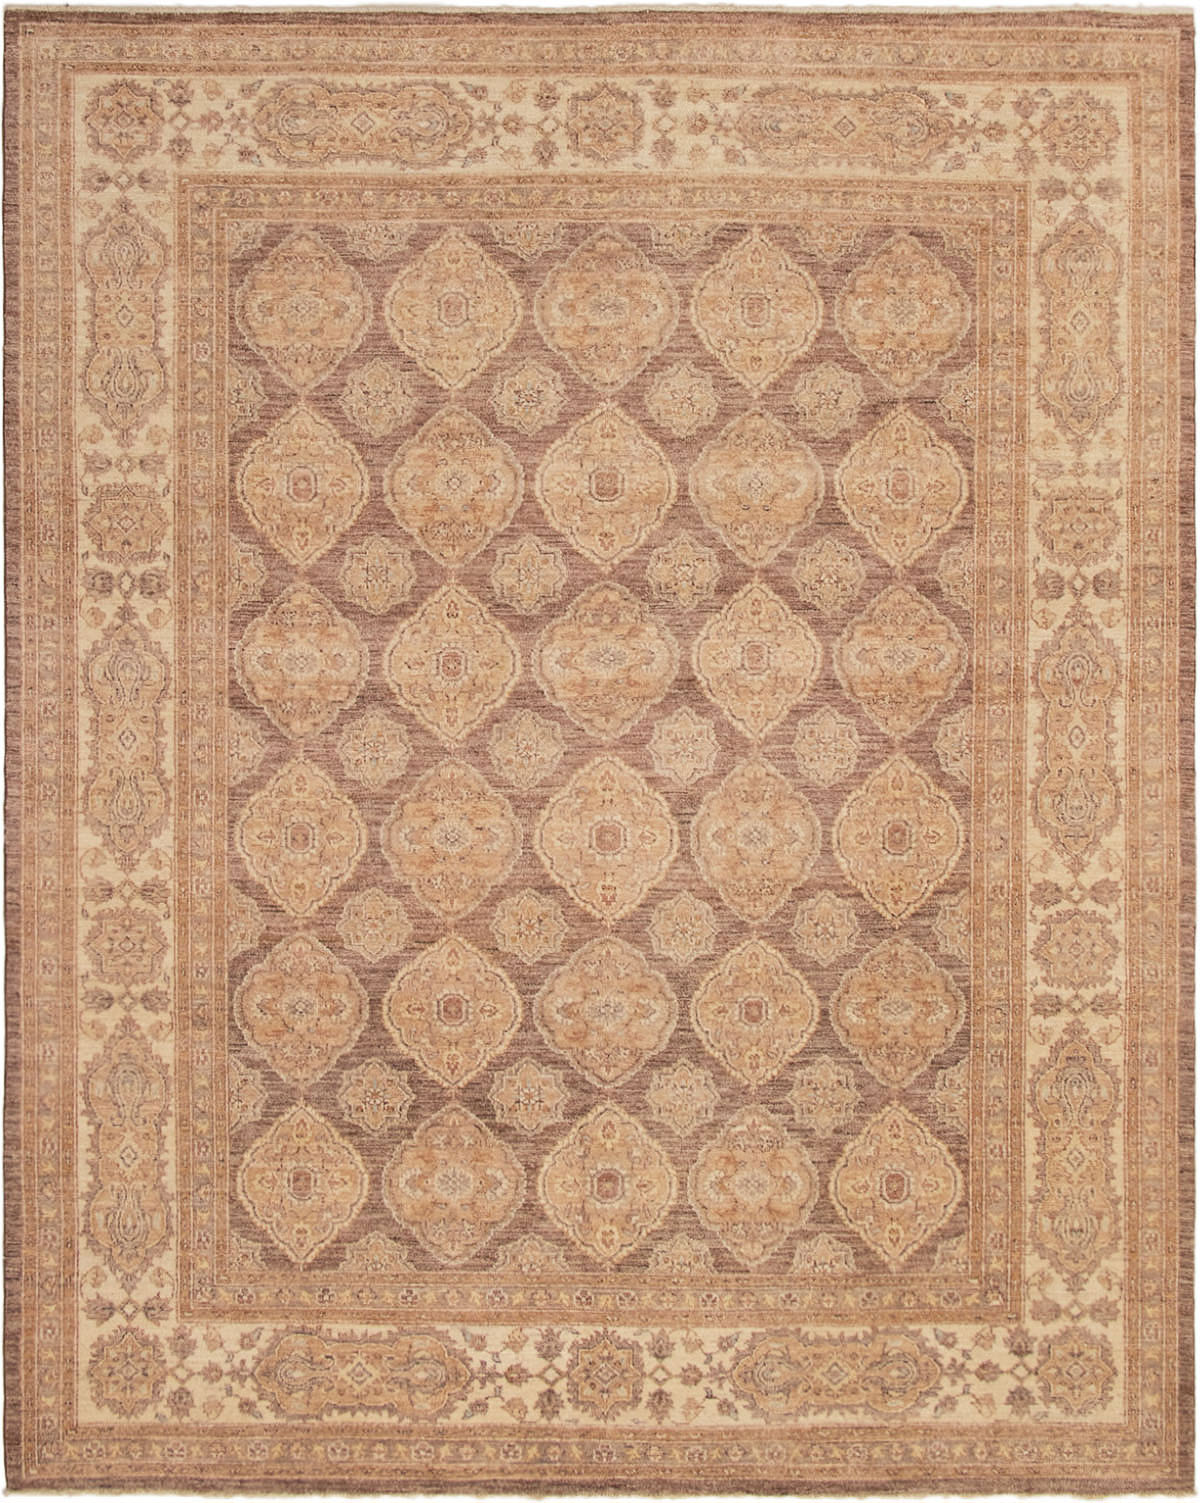 Hand-knotted Peshawar Finest Brown Wool Rug 8'0" x 10'0"  Size: 8'0" x 10'0"  